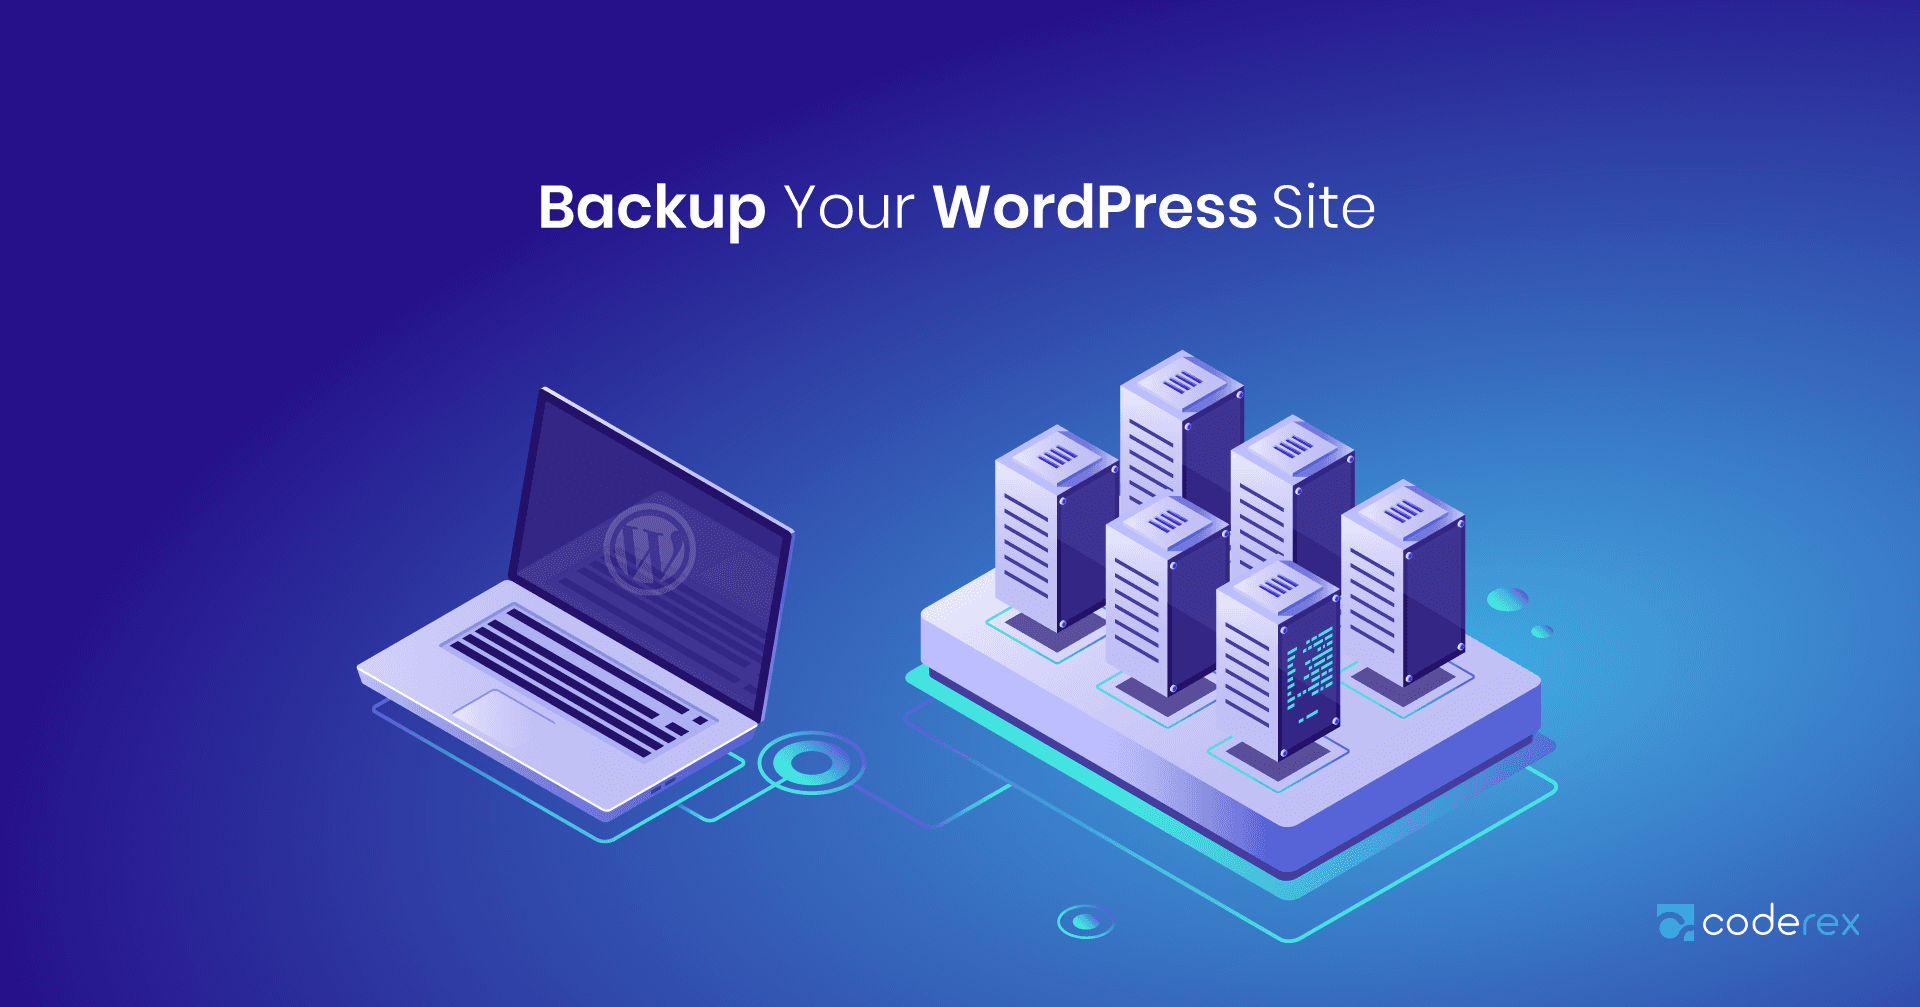 How To Backup Your WordPress Site?